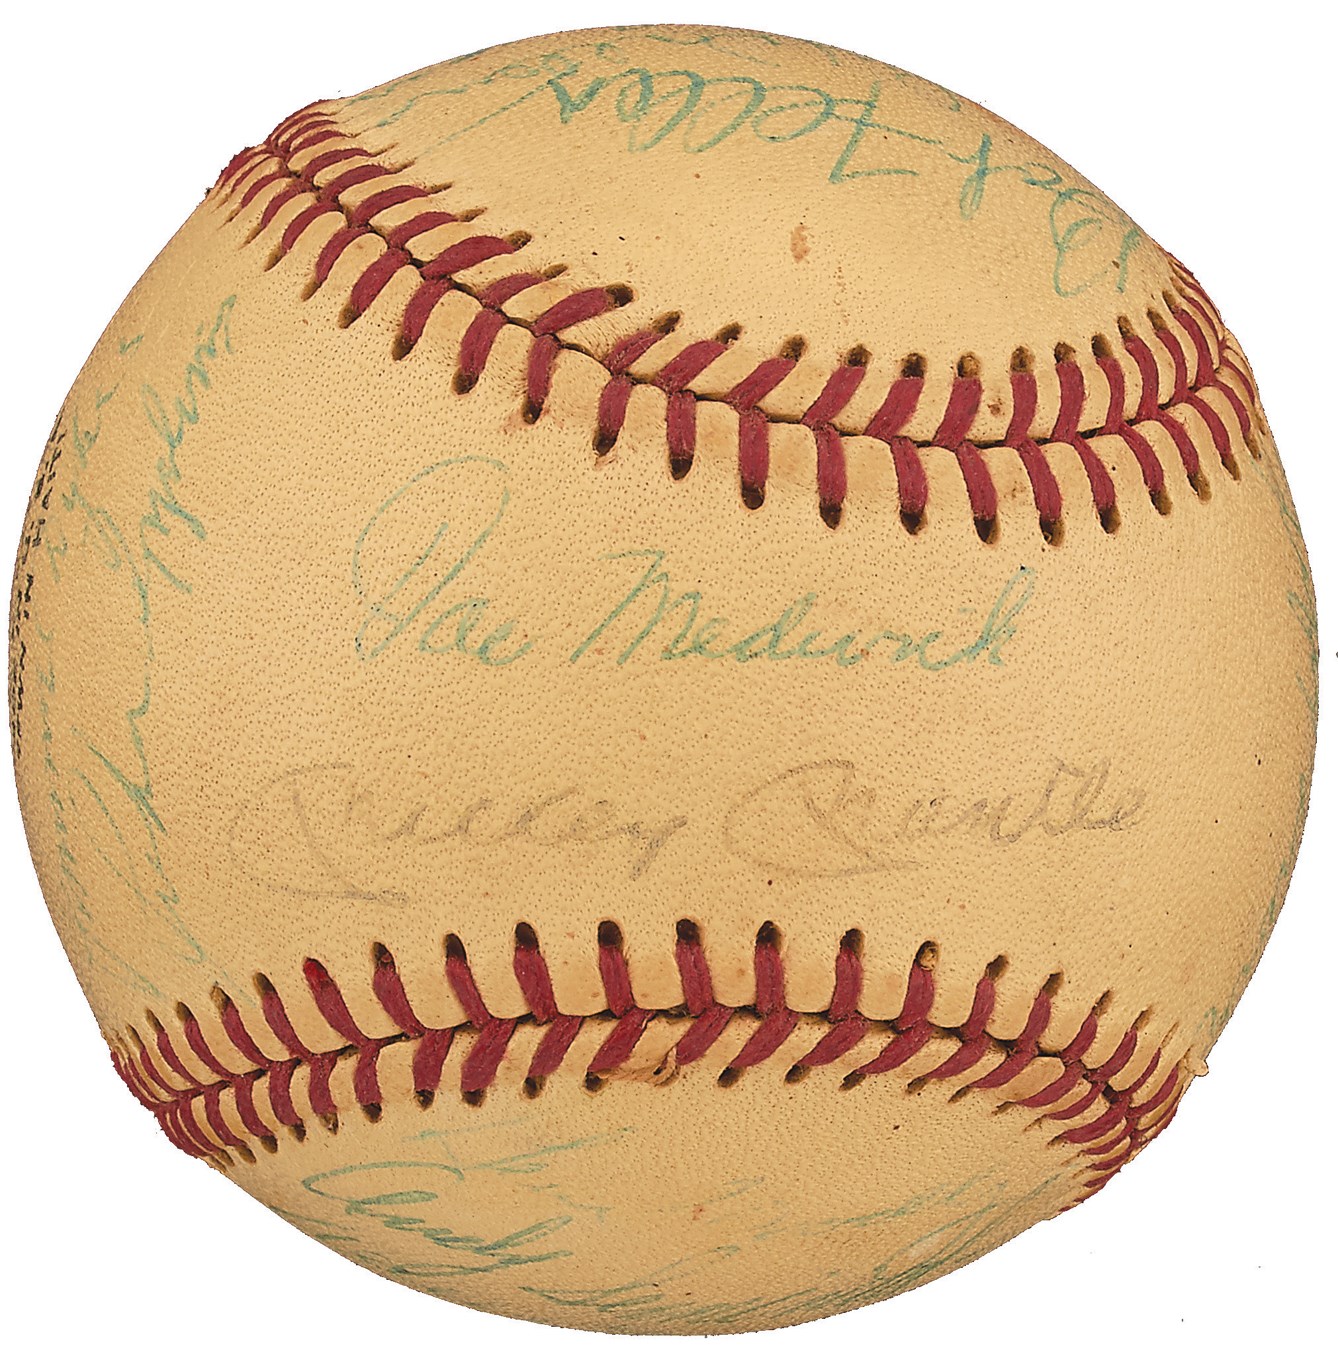 Circa 1974 Hall of Famers Signed Baseball with Mantle and Medwick